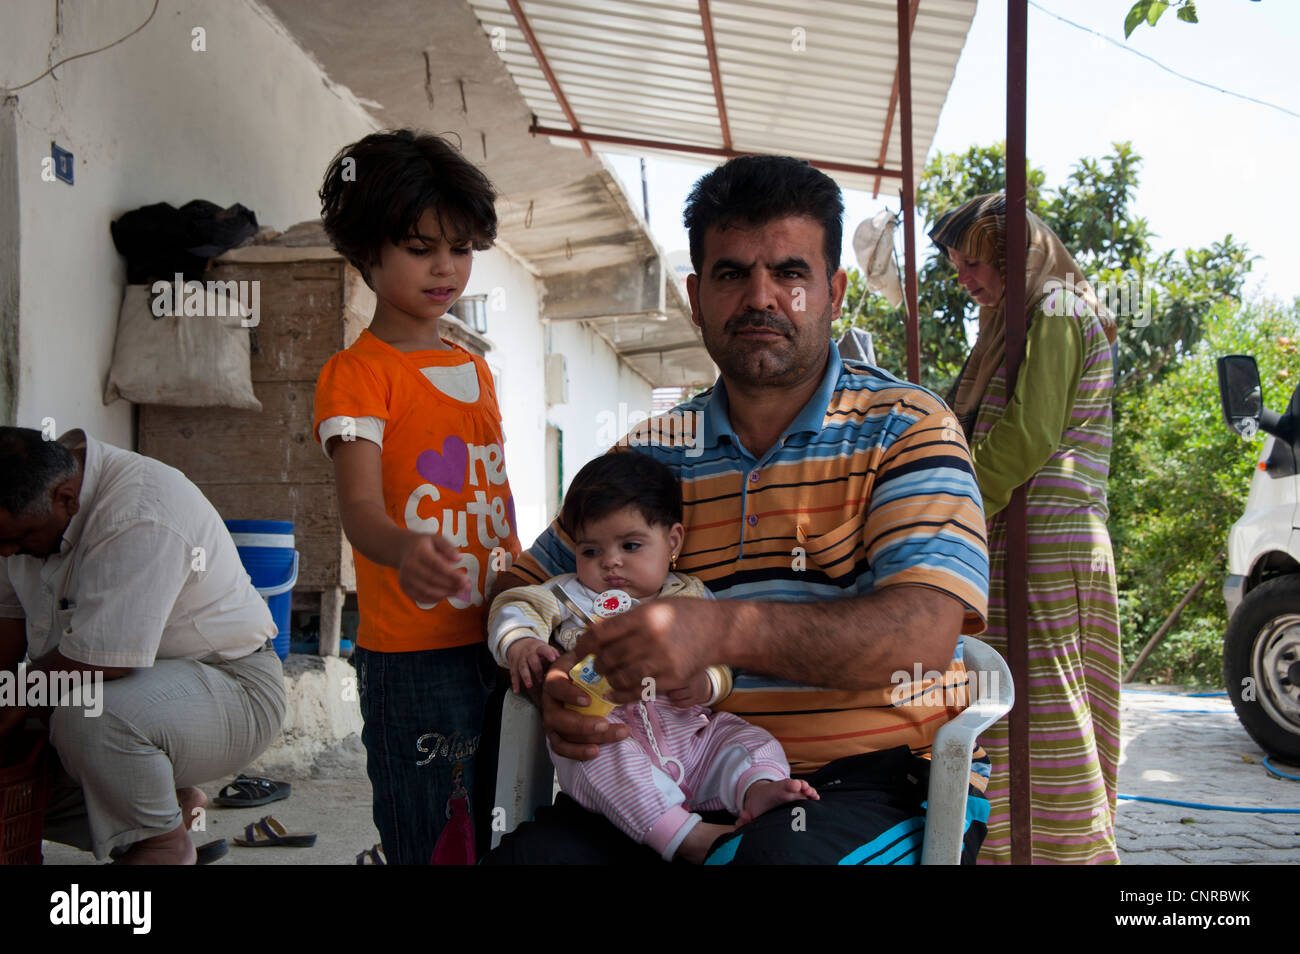 A refugee with his family., A refugee with his family. Stock Photo